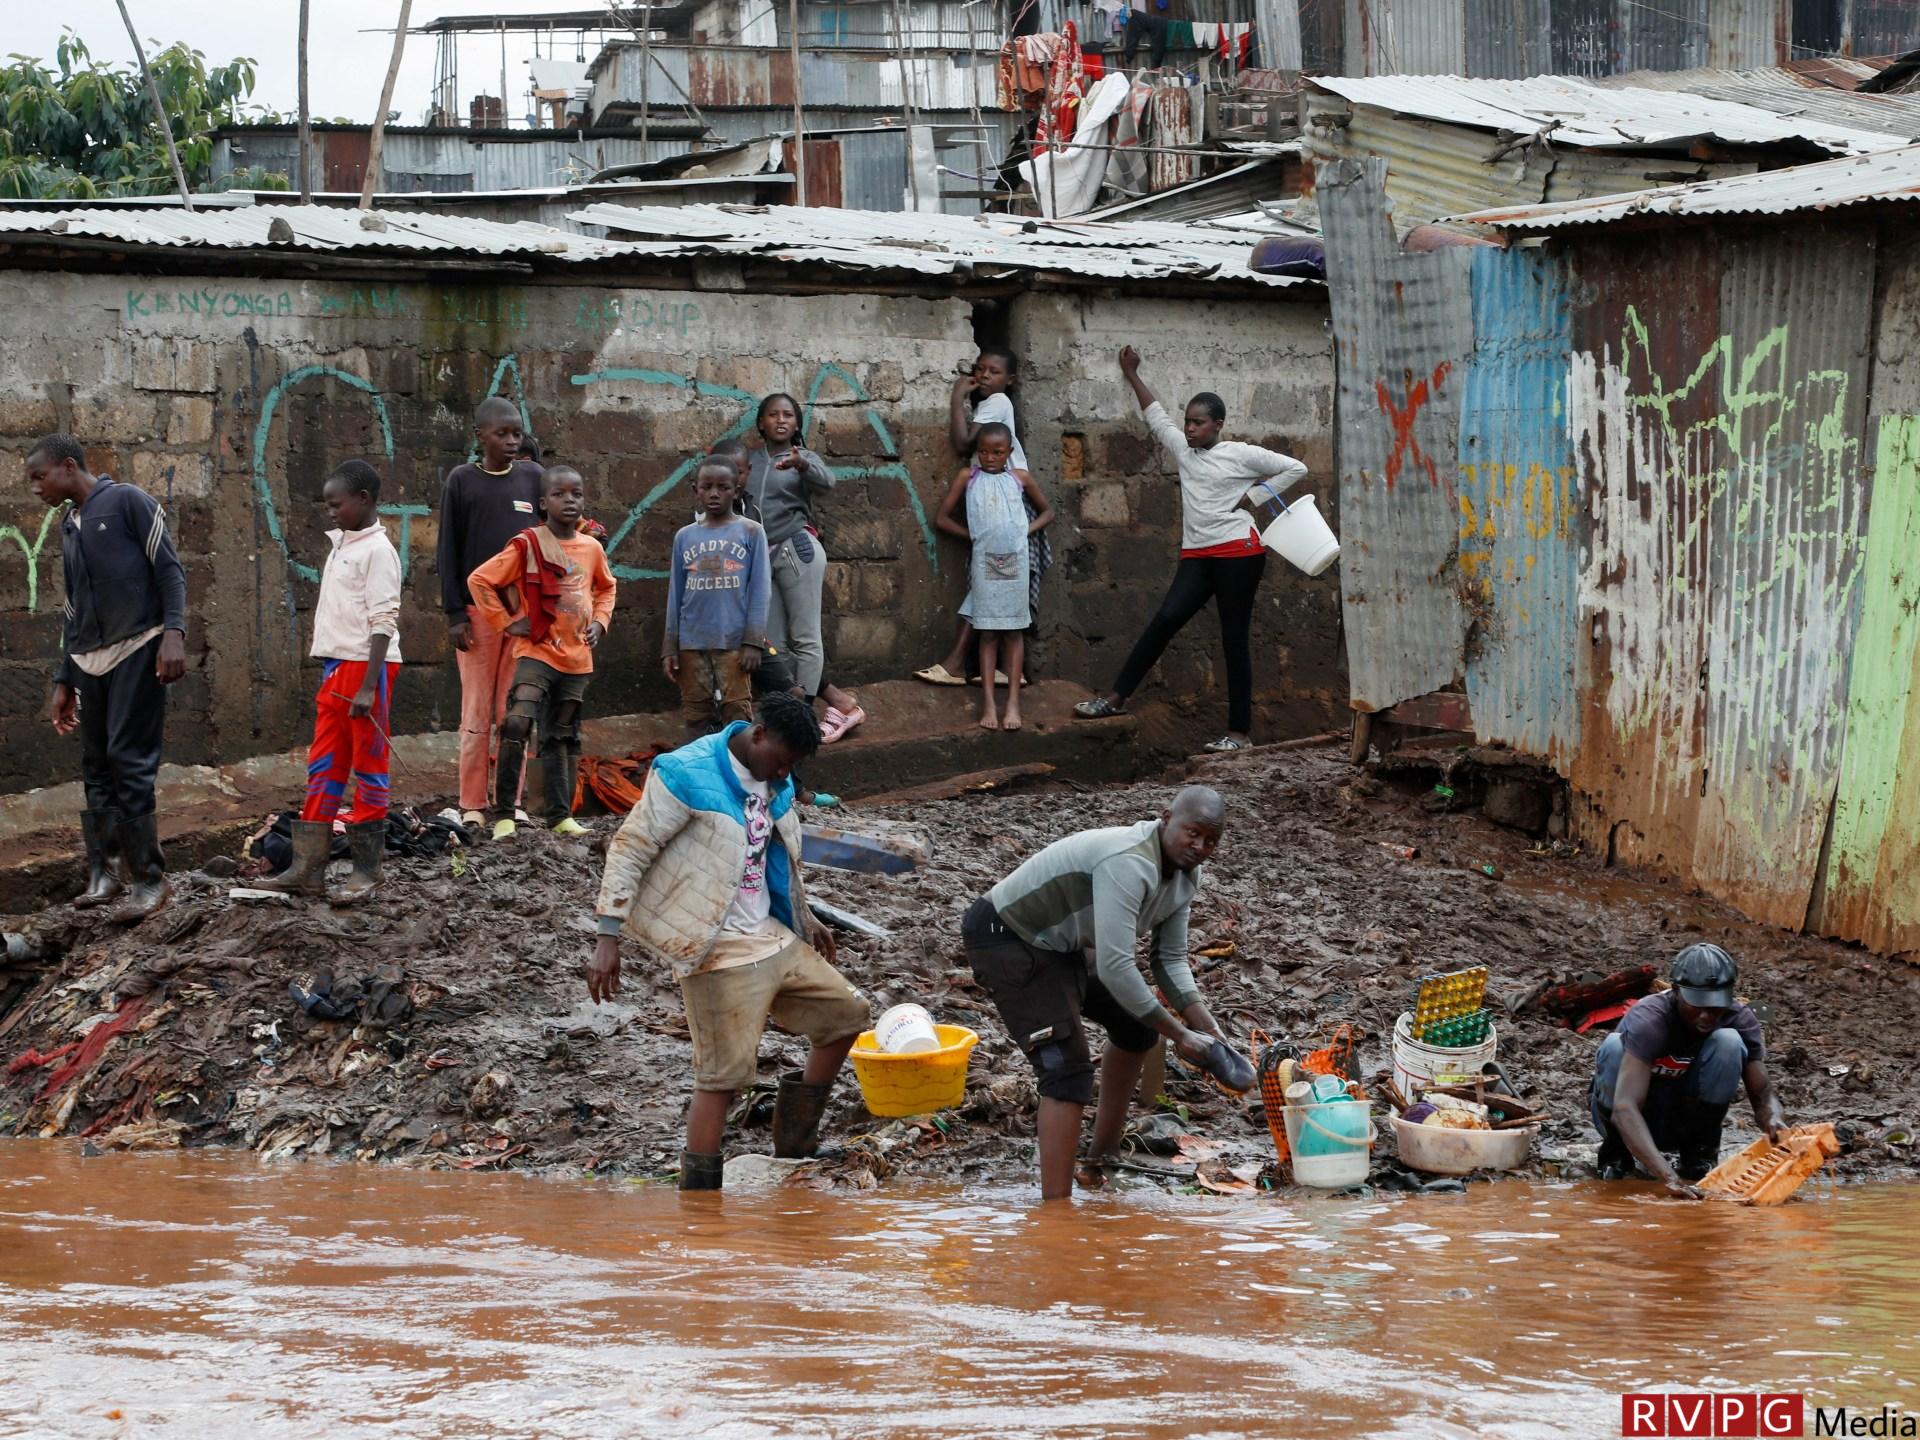 A dam burst in Kenya puts the death toll in floods at over 120